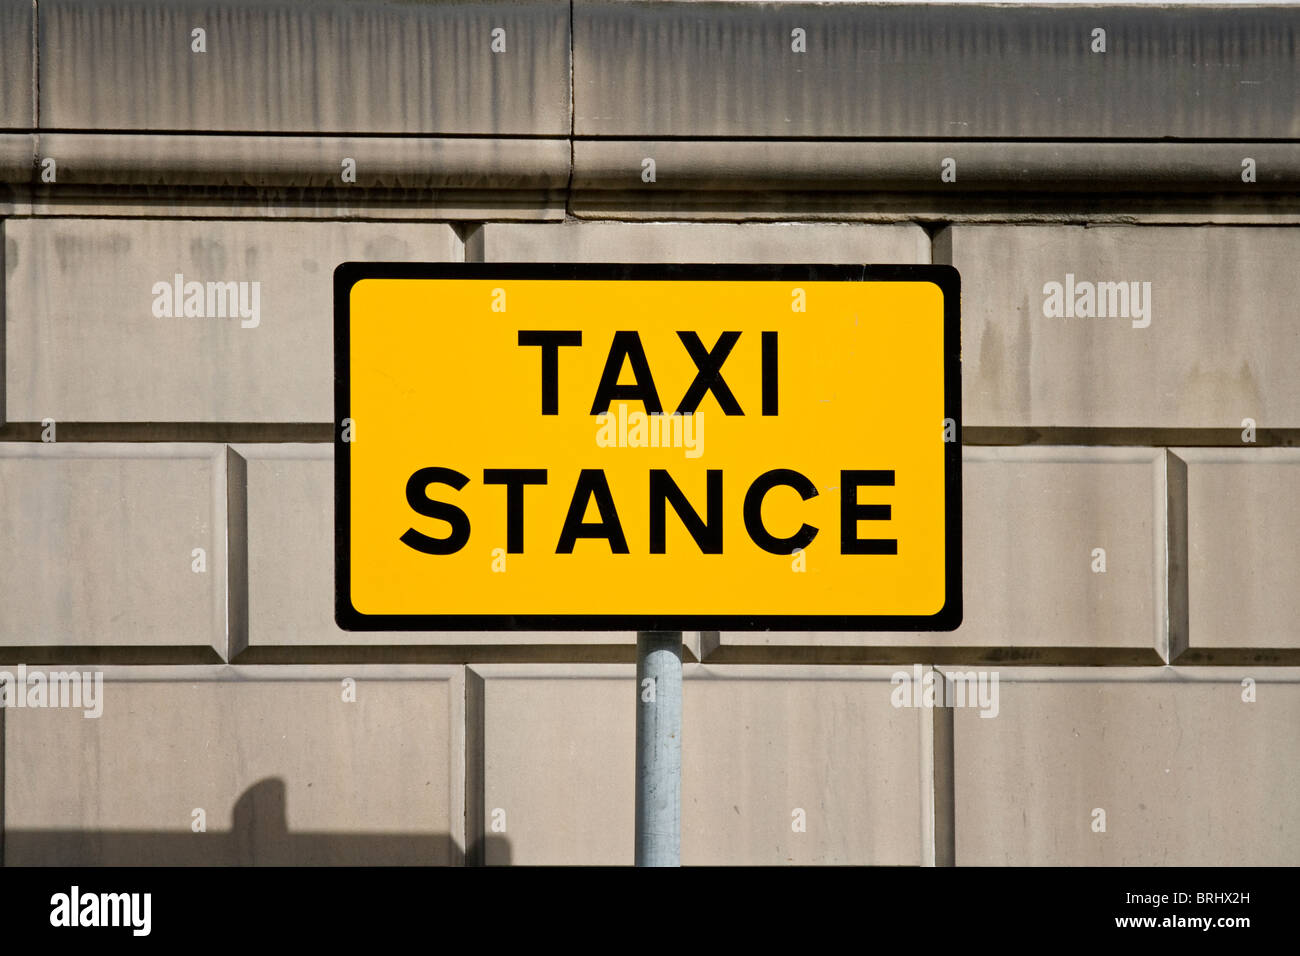 Taxi cab stance Stock Photo